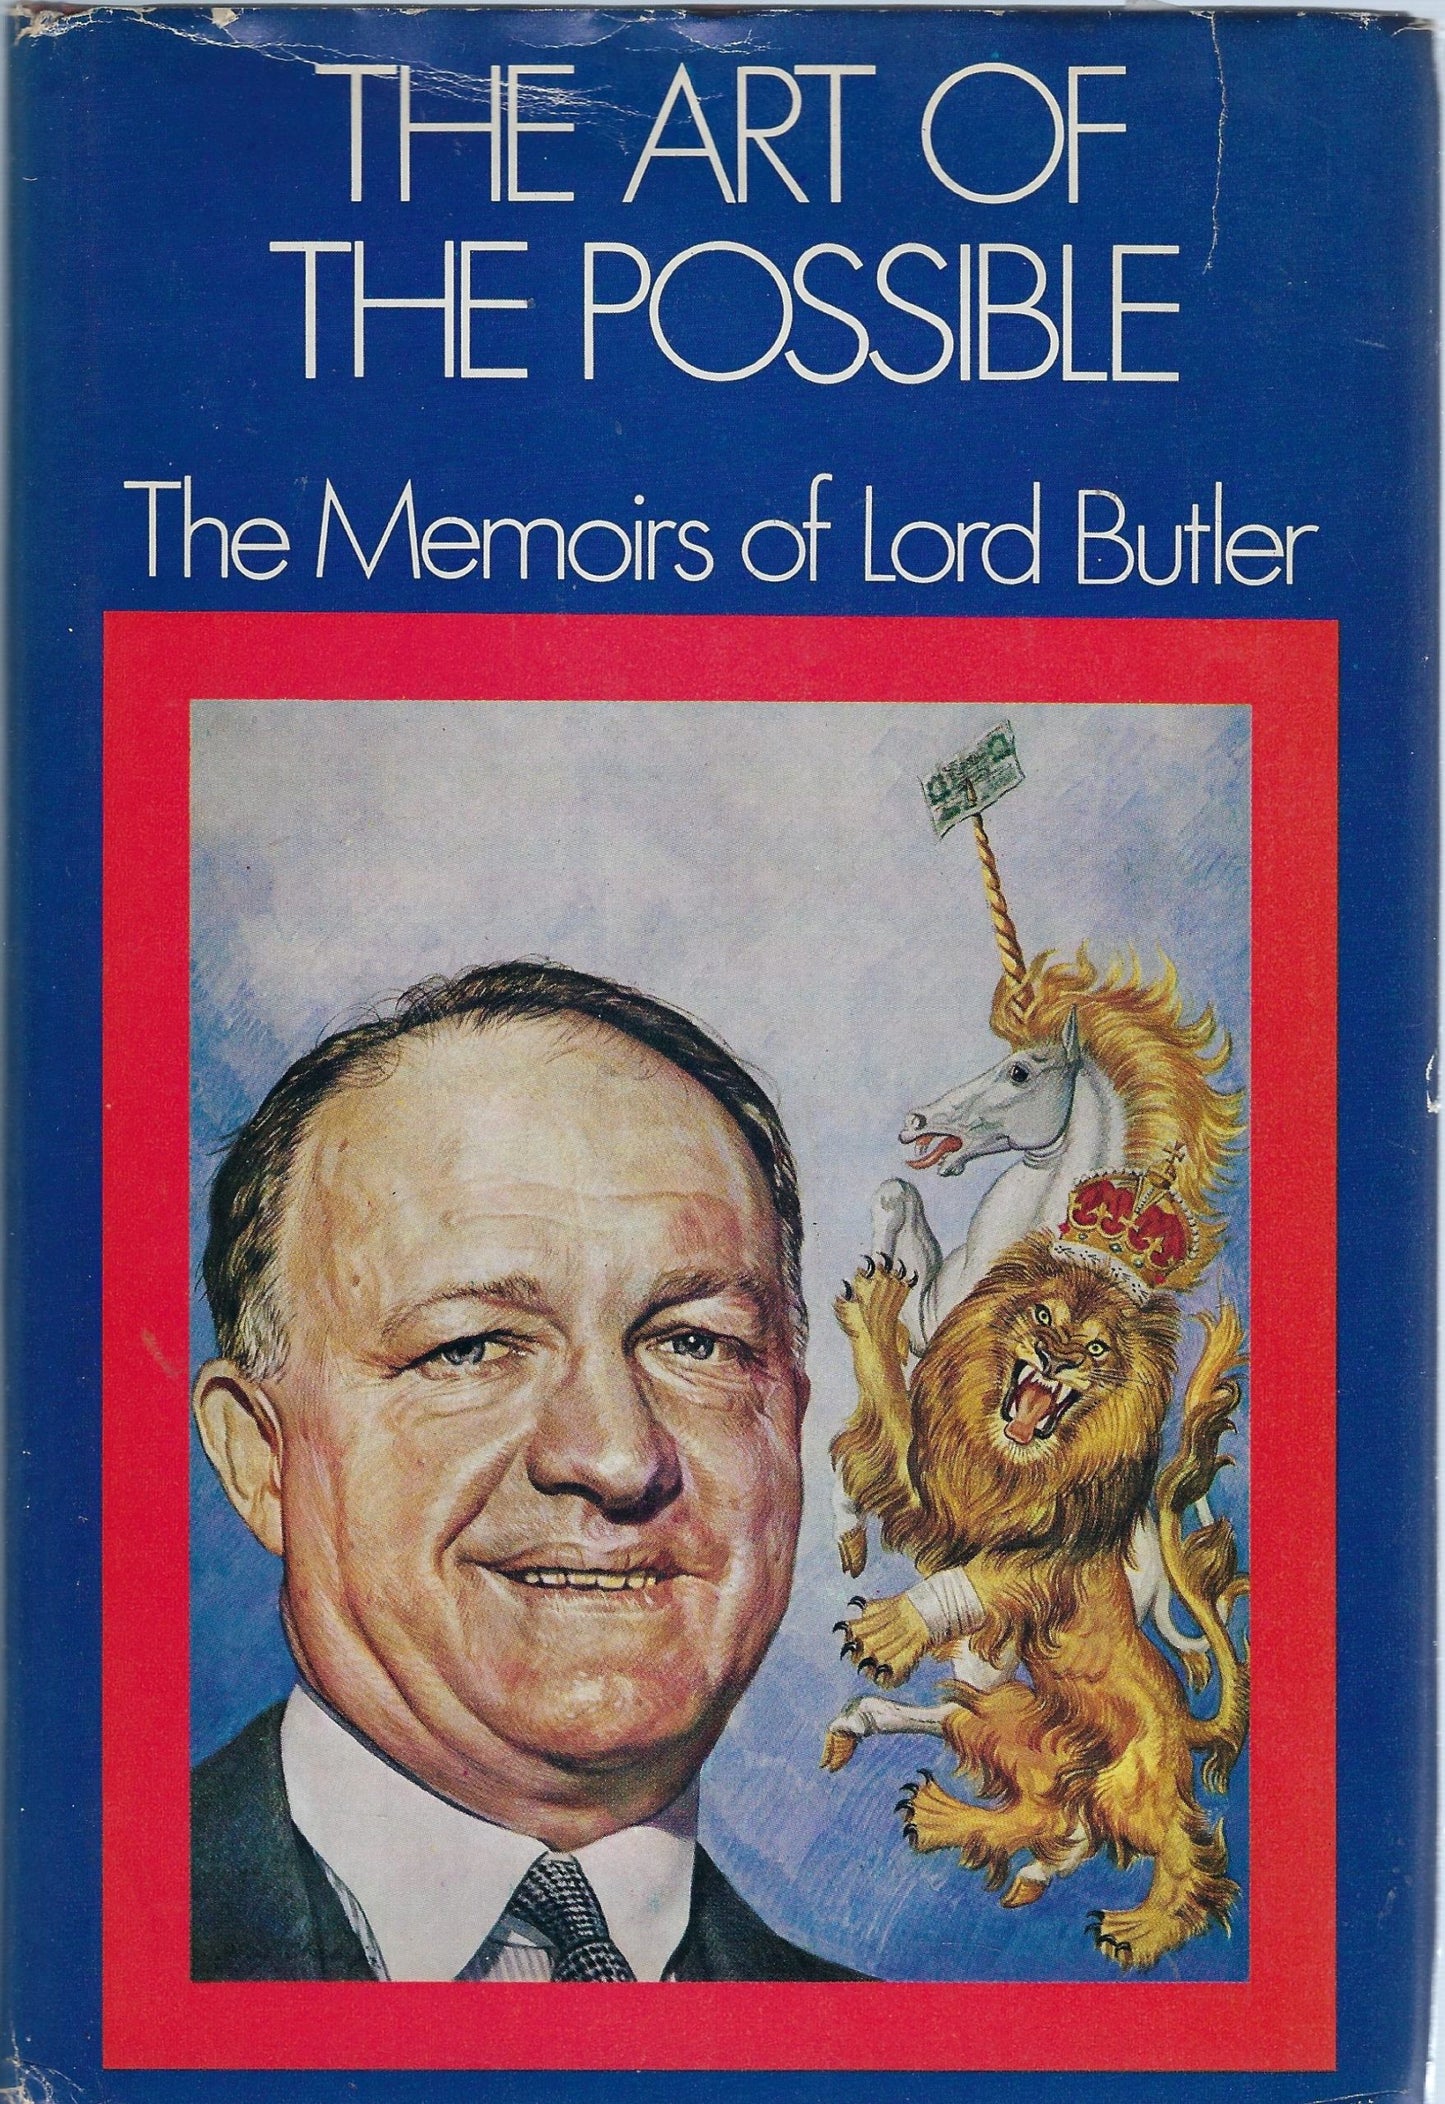 The art of the possible, the memoires of Lord Butler